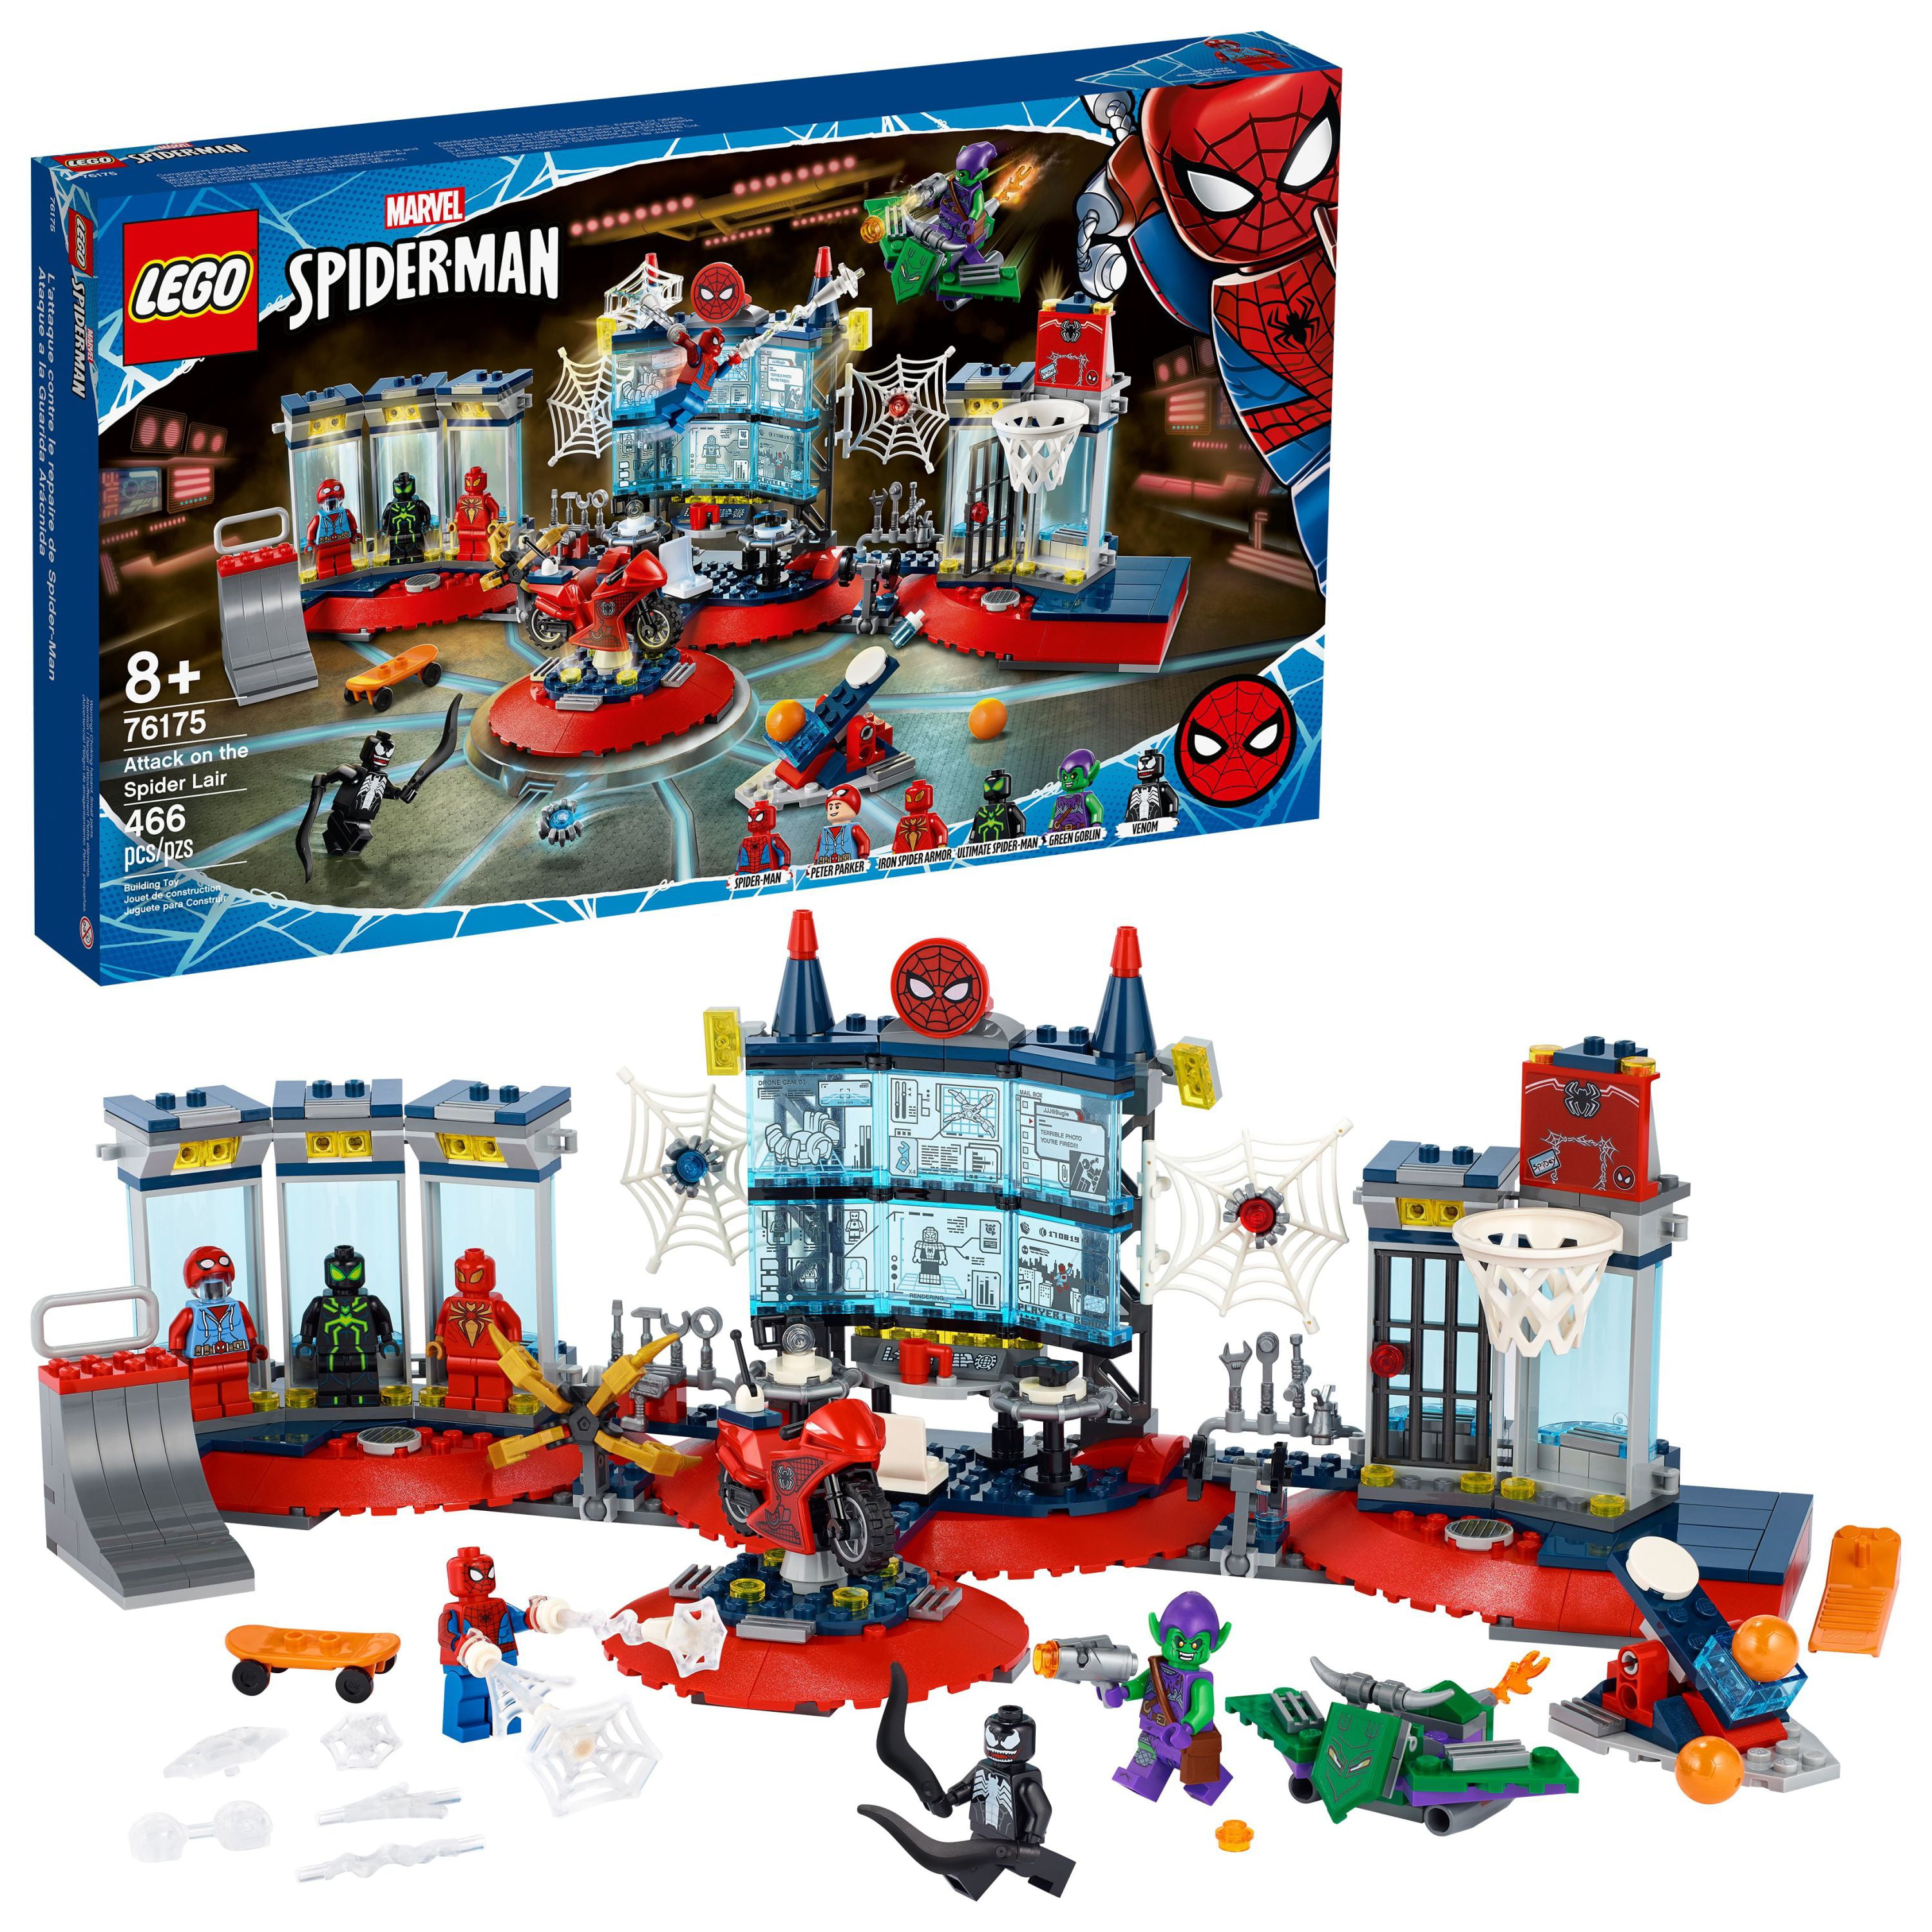 LEGO Marvel Spider-Man Attack on the Spider Lair Building Toy 76175